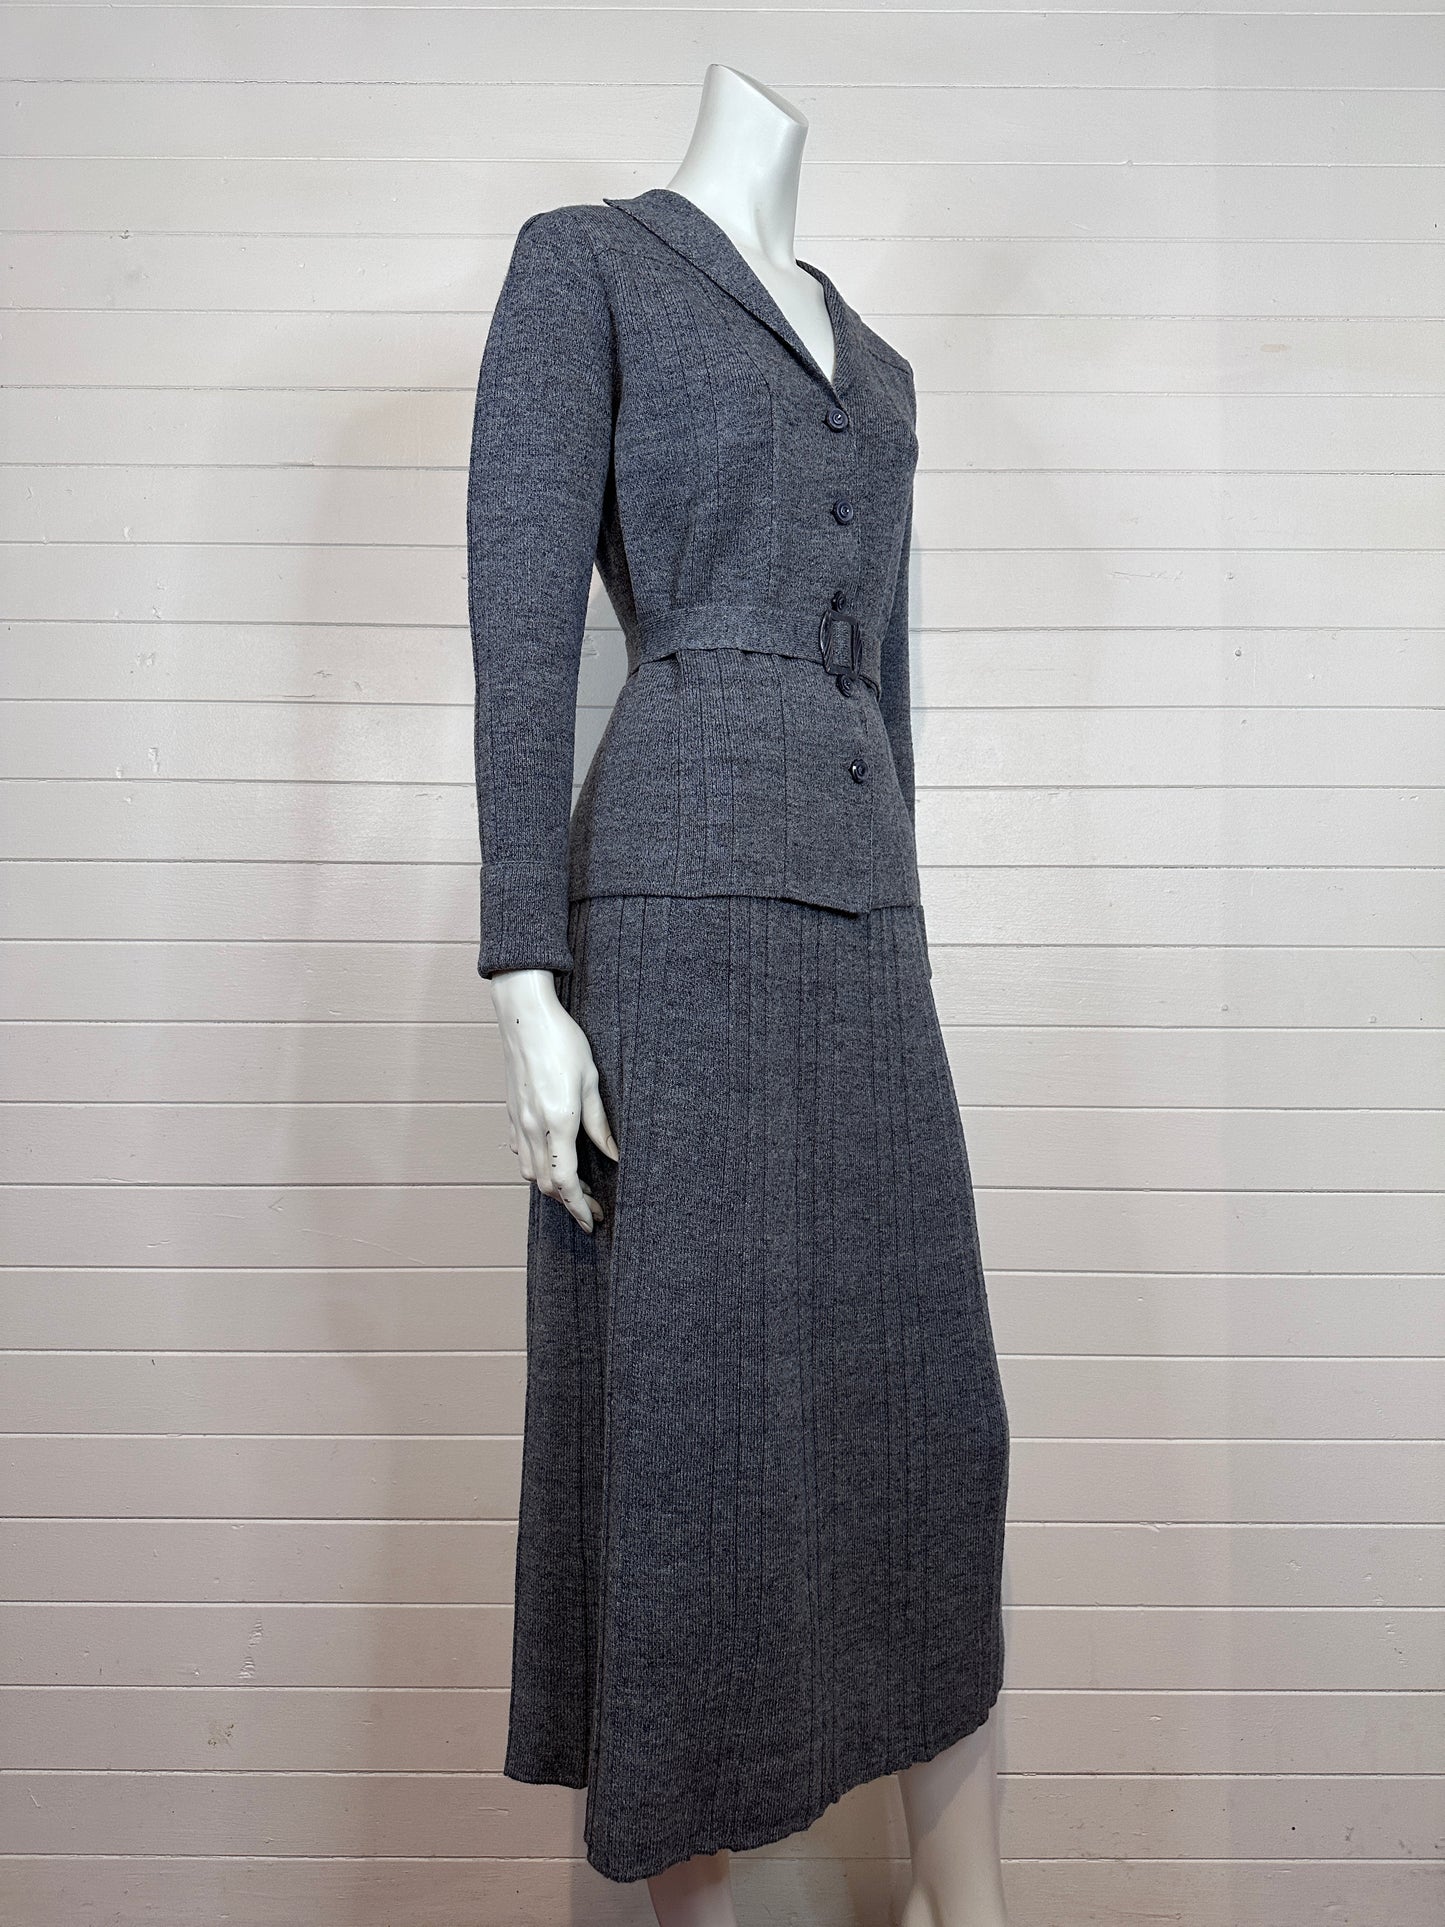 1930's Grey Knitwear Sweater and Skirt Dress Set - Mint Vintage Condition (S-M)